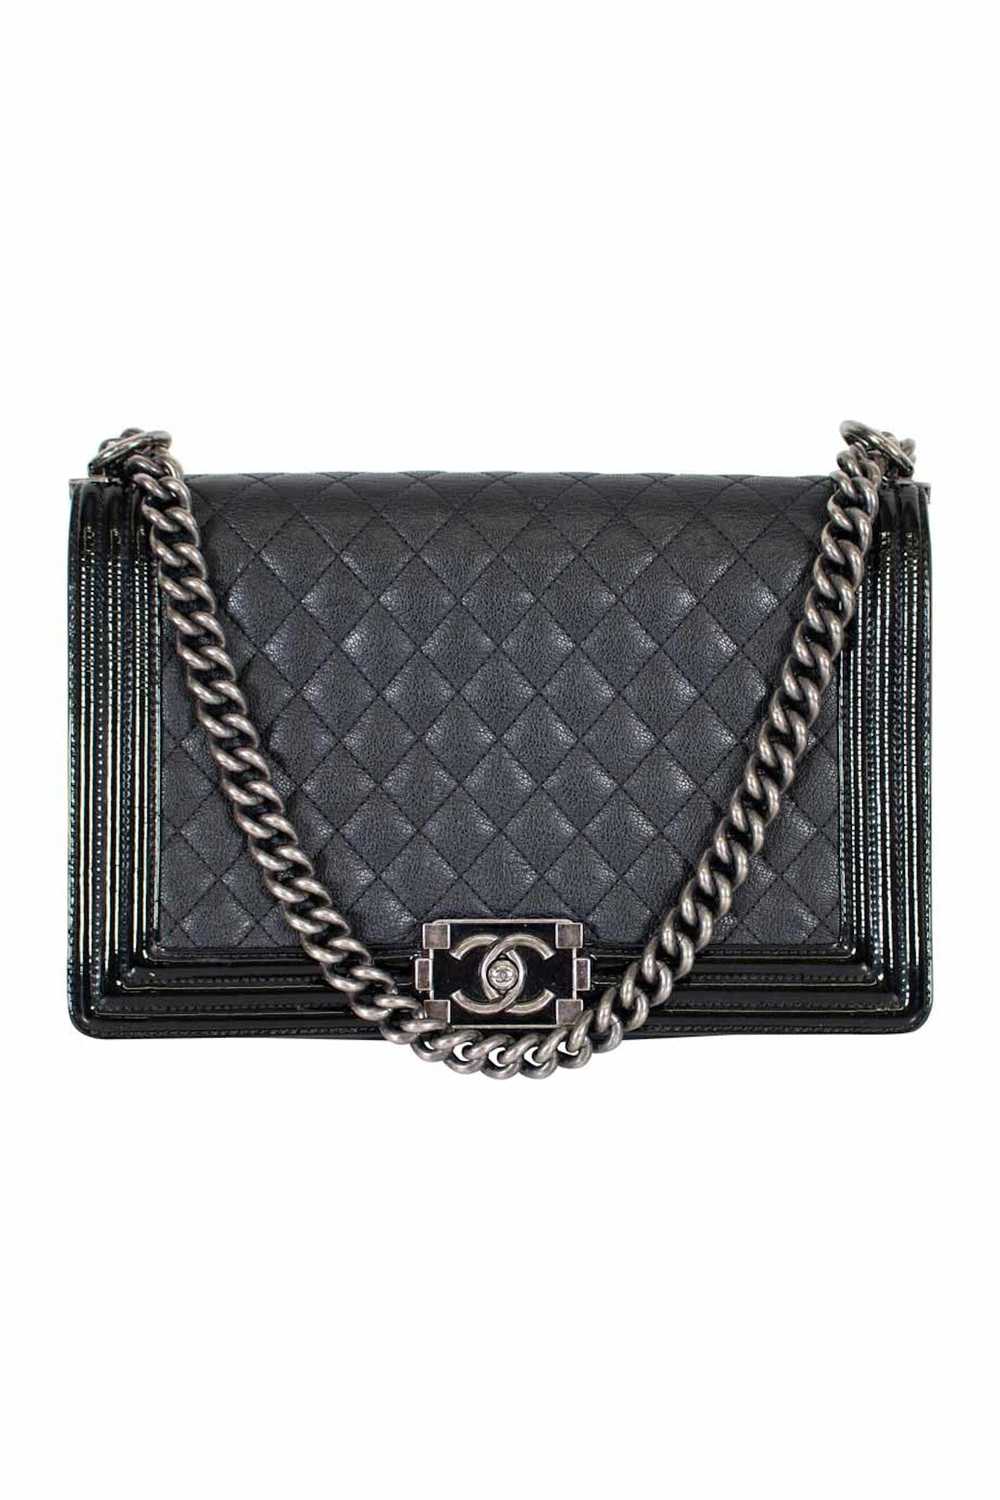 Chanel CHANEL Black grained calfskin quilted 'Boy… - image 2